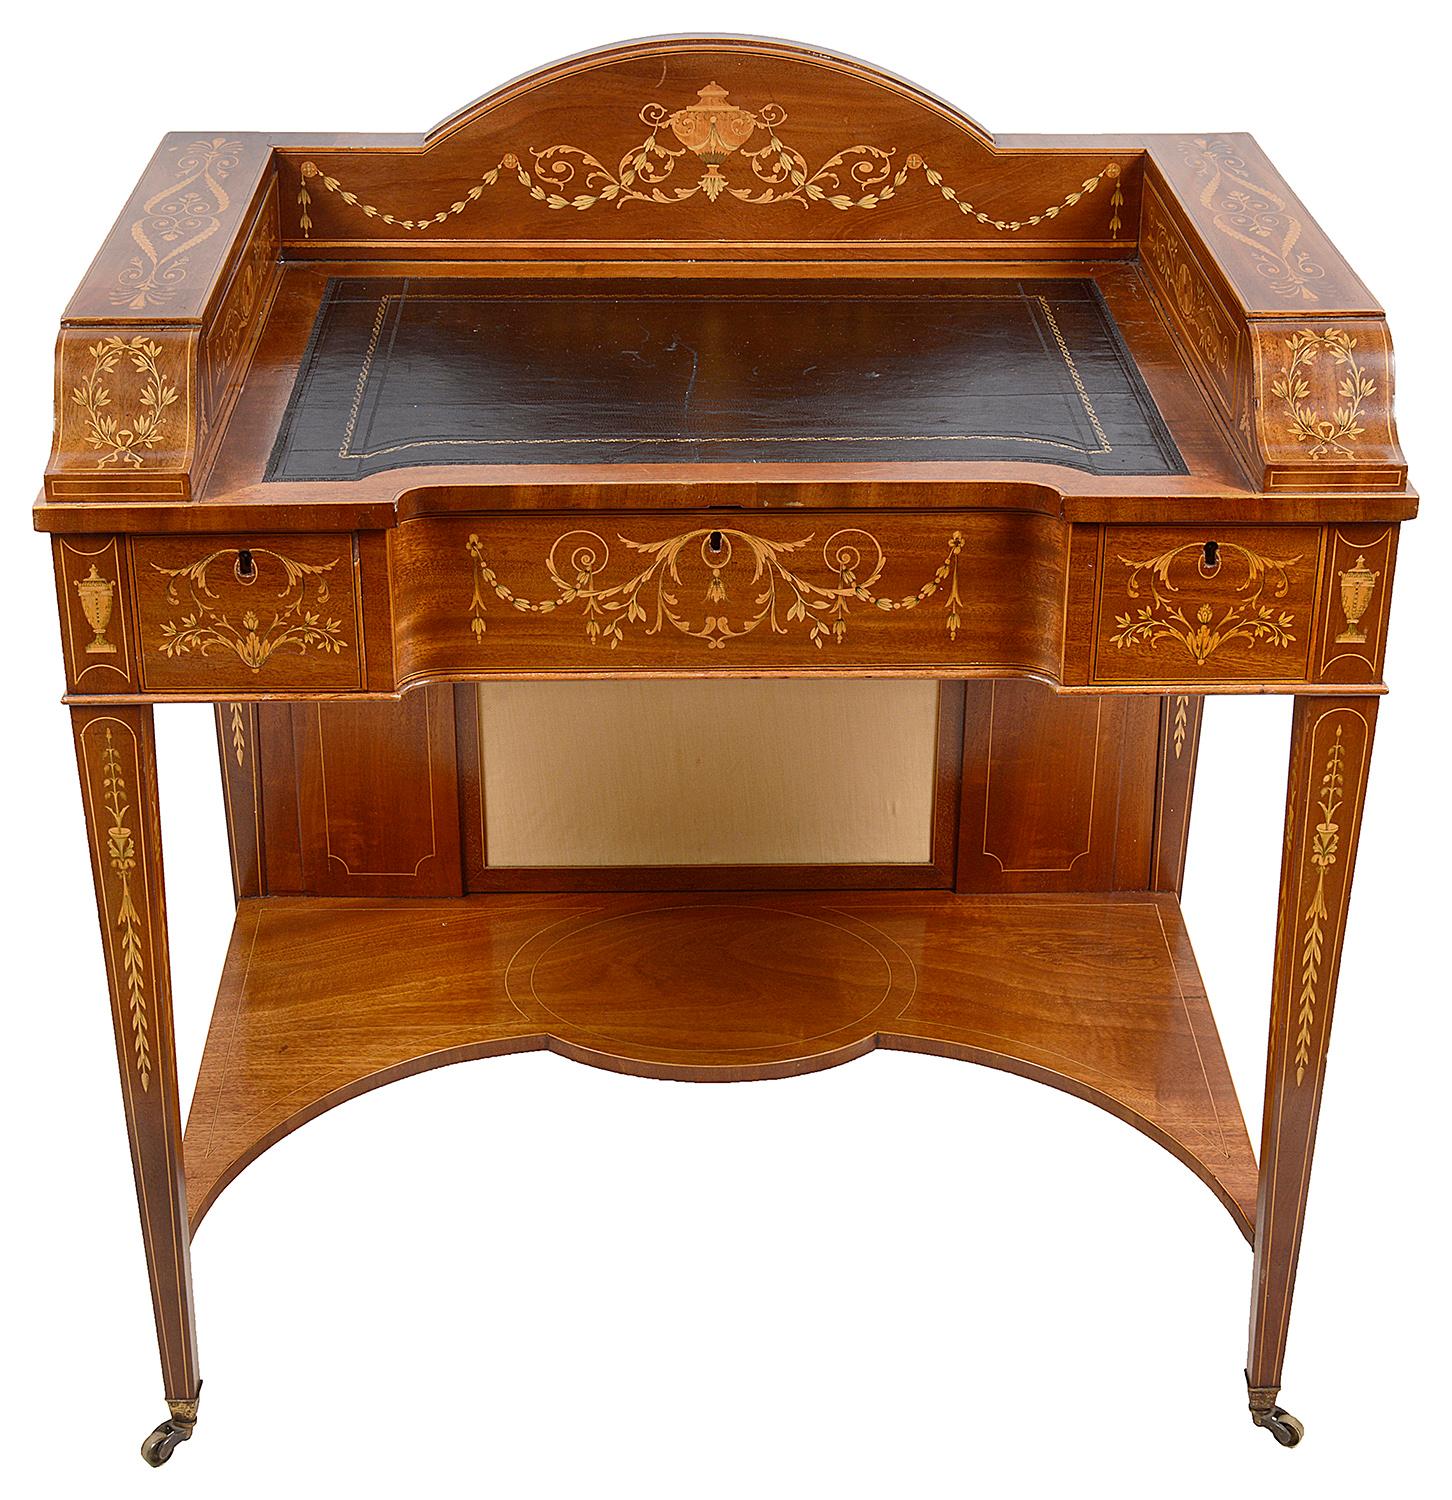 A fine quality late 19th century mahogany inlaid, Sheraton revival ladies writing desk. having drawers and compartments to the superstructure, an inset leather writing surface, three frieze drawers, wonderfully fine boxwood inlaid decoration,